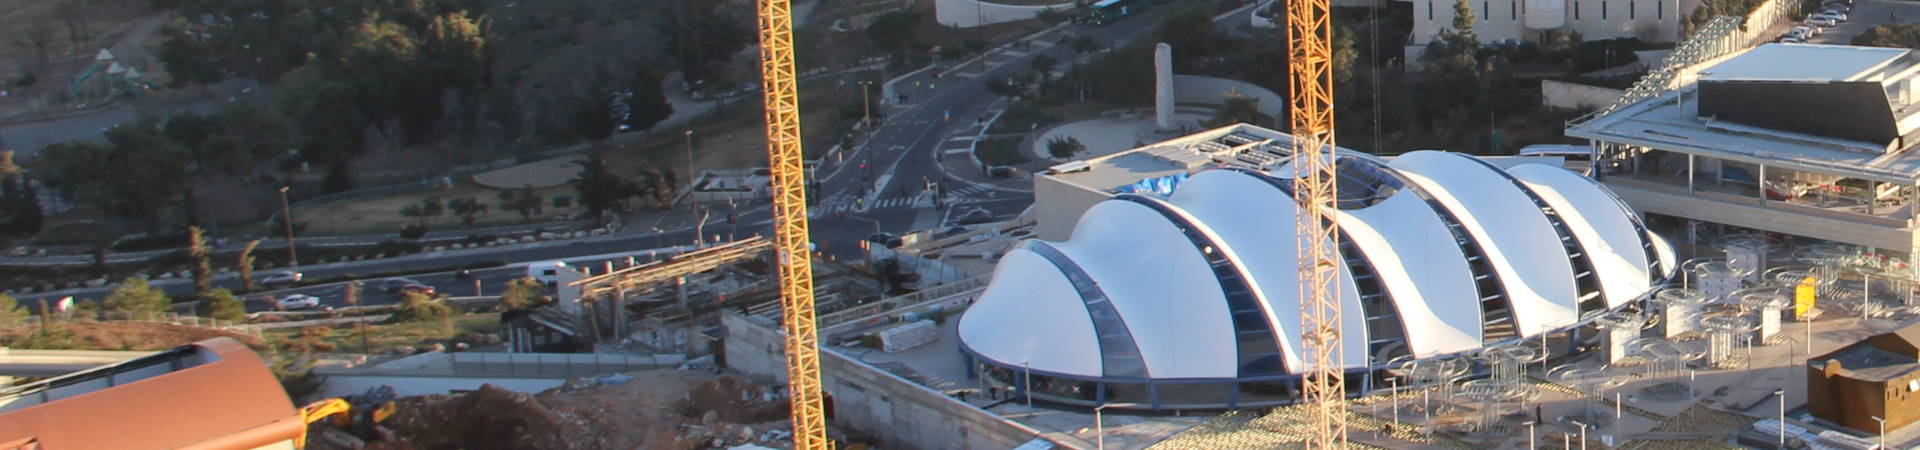 The tensile structure roofing the Cinema City building in Jerusalem